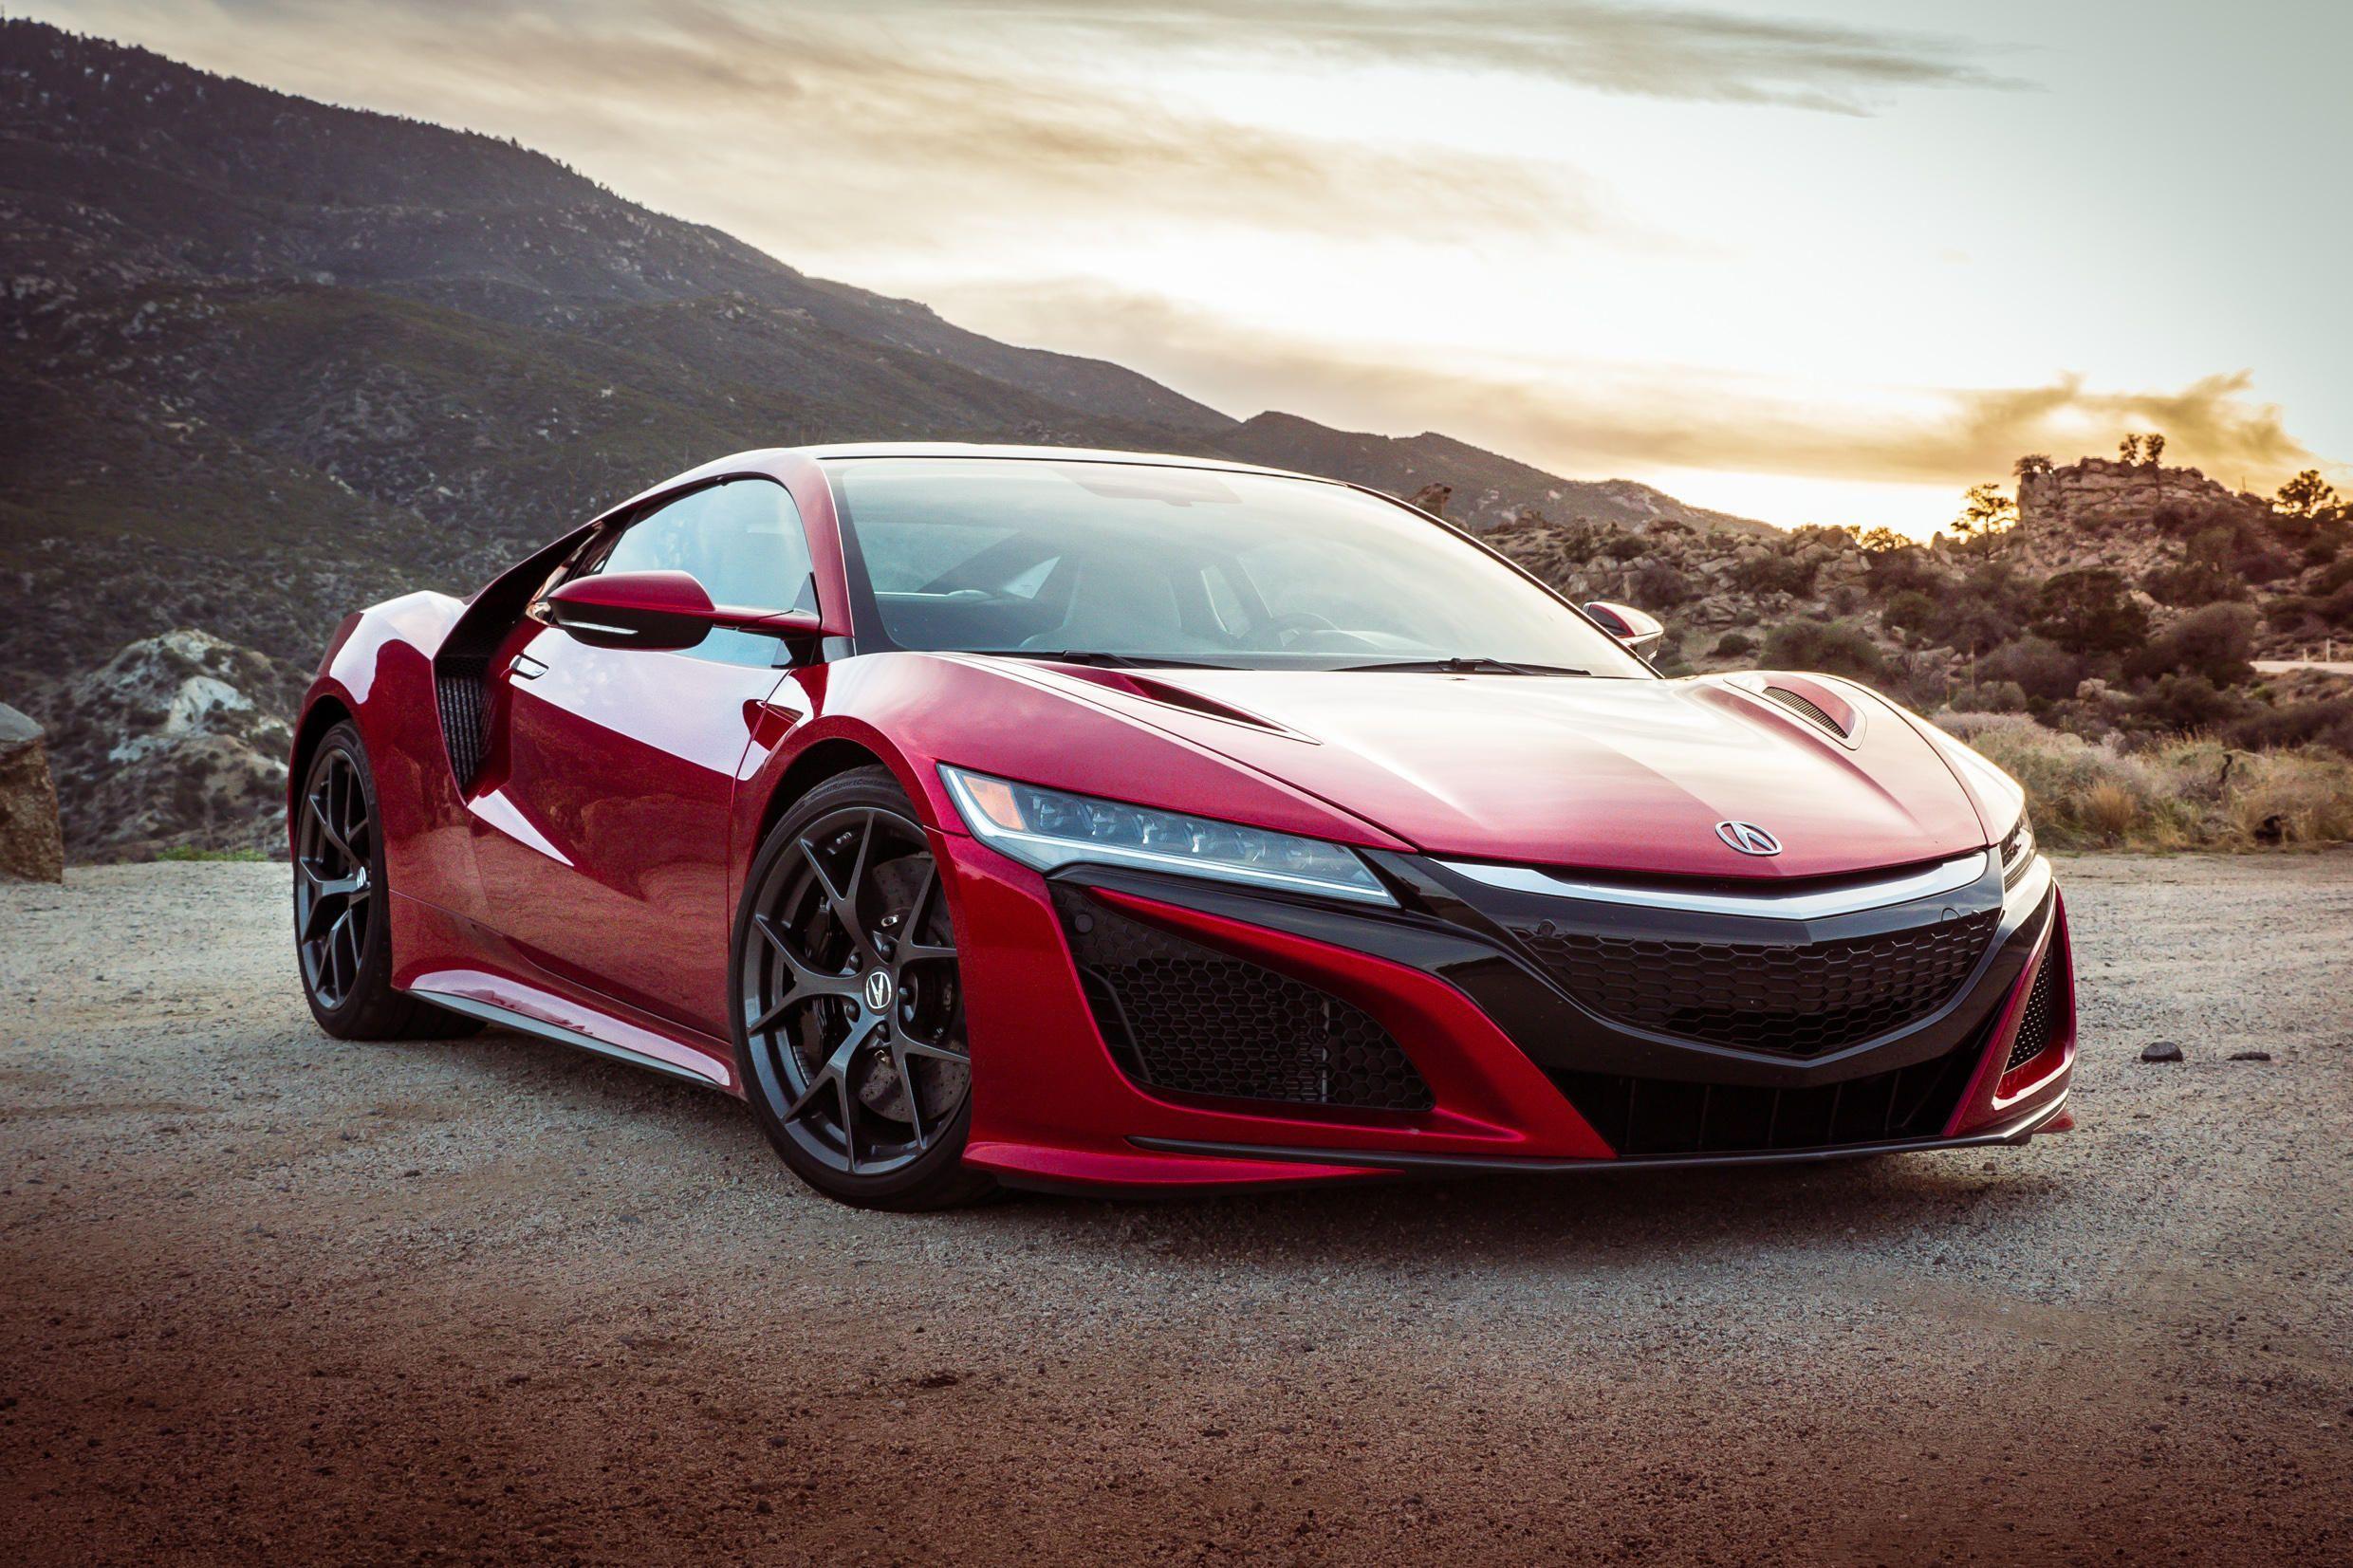 2017 Acura Nsx - Acura Nsx Wallpaper 4k , HD Wallpaper & Backgrounds